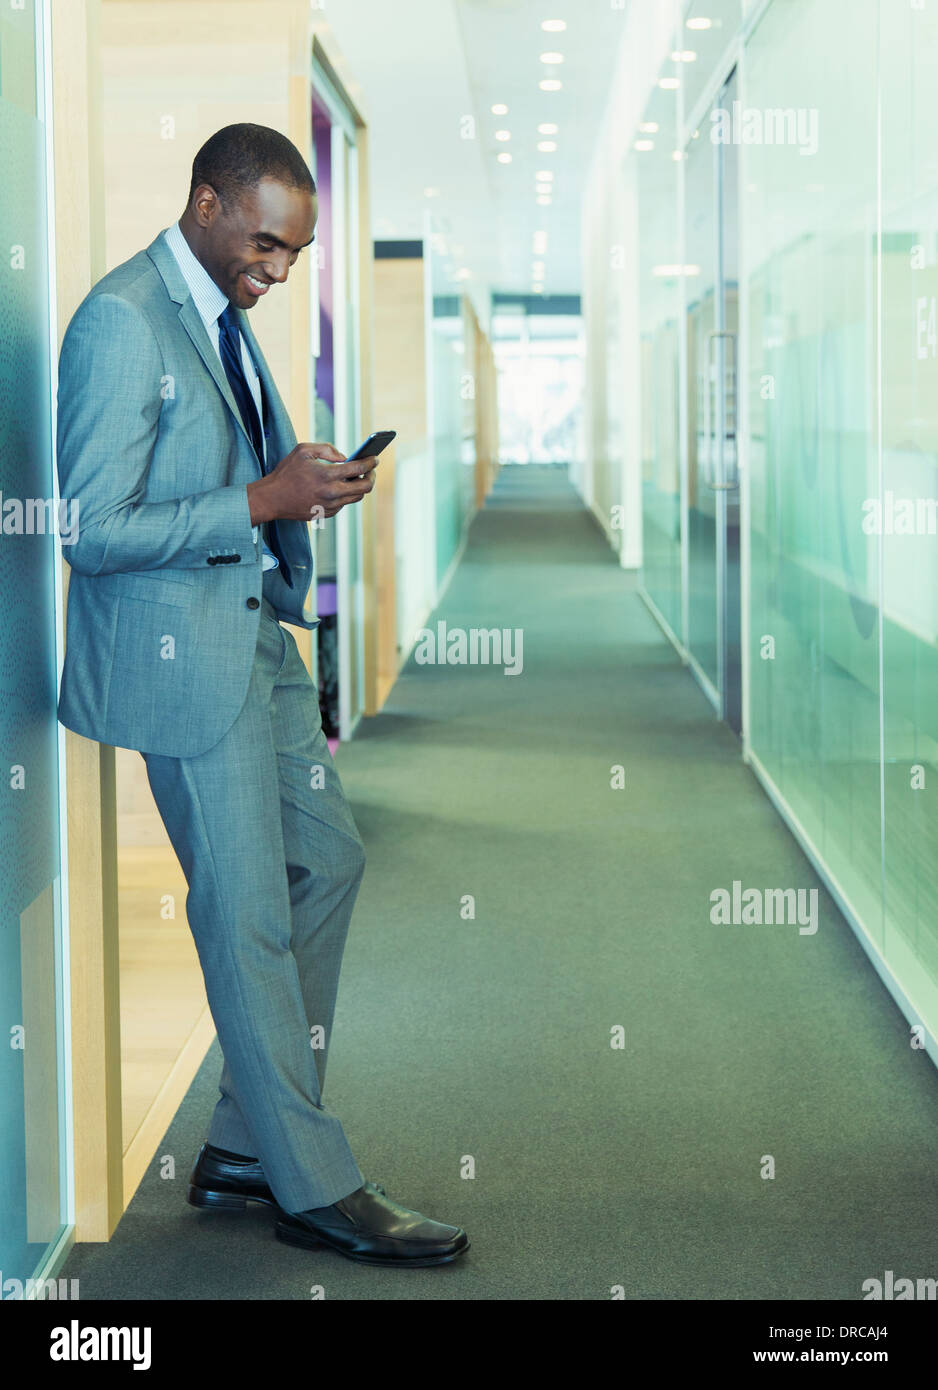 Businessman using cell phone in office corridor Banque D'Images